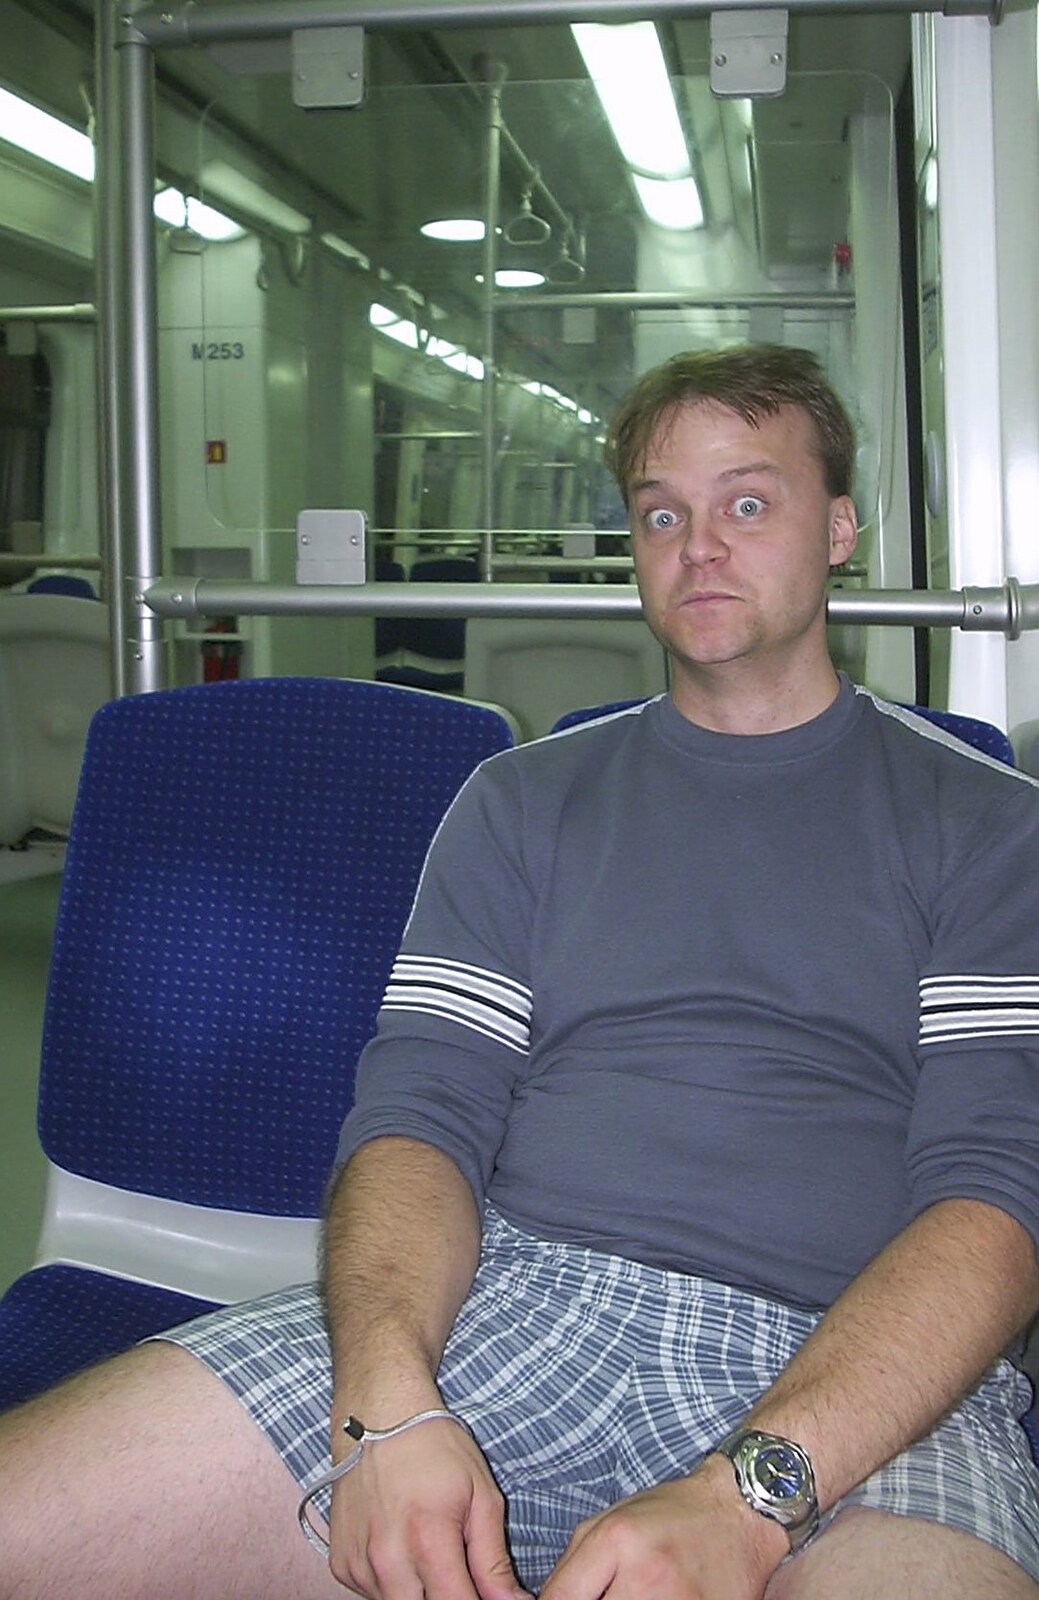 A Postcard From Athens: A Day Trip to the Olympics, Greece - 19th August 2004: On the train into Athens at around 0530